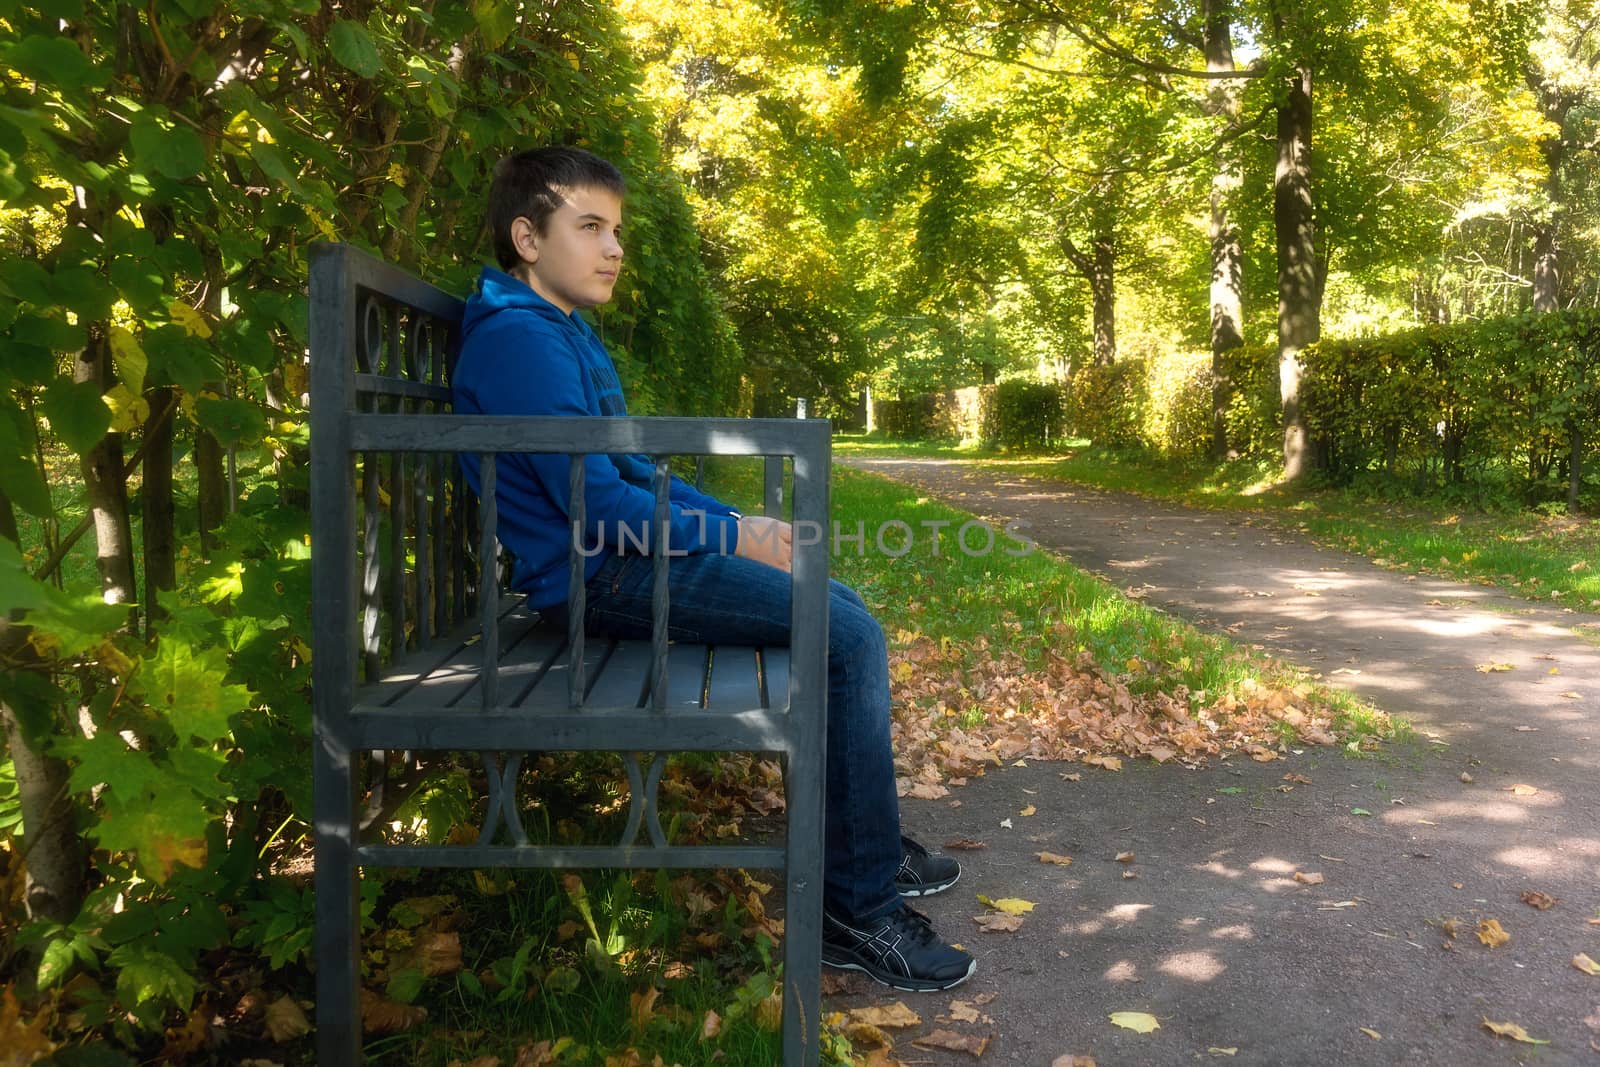 The photo depicts a boy sitting on a bench